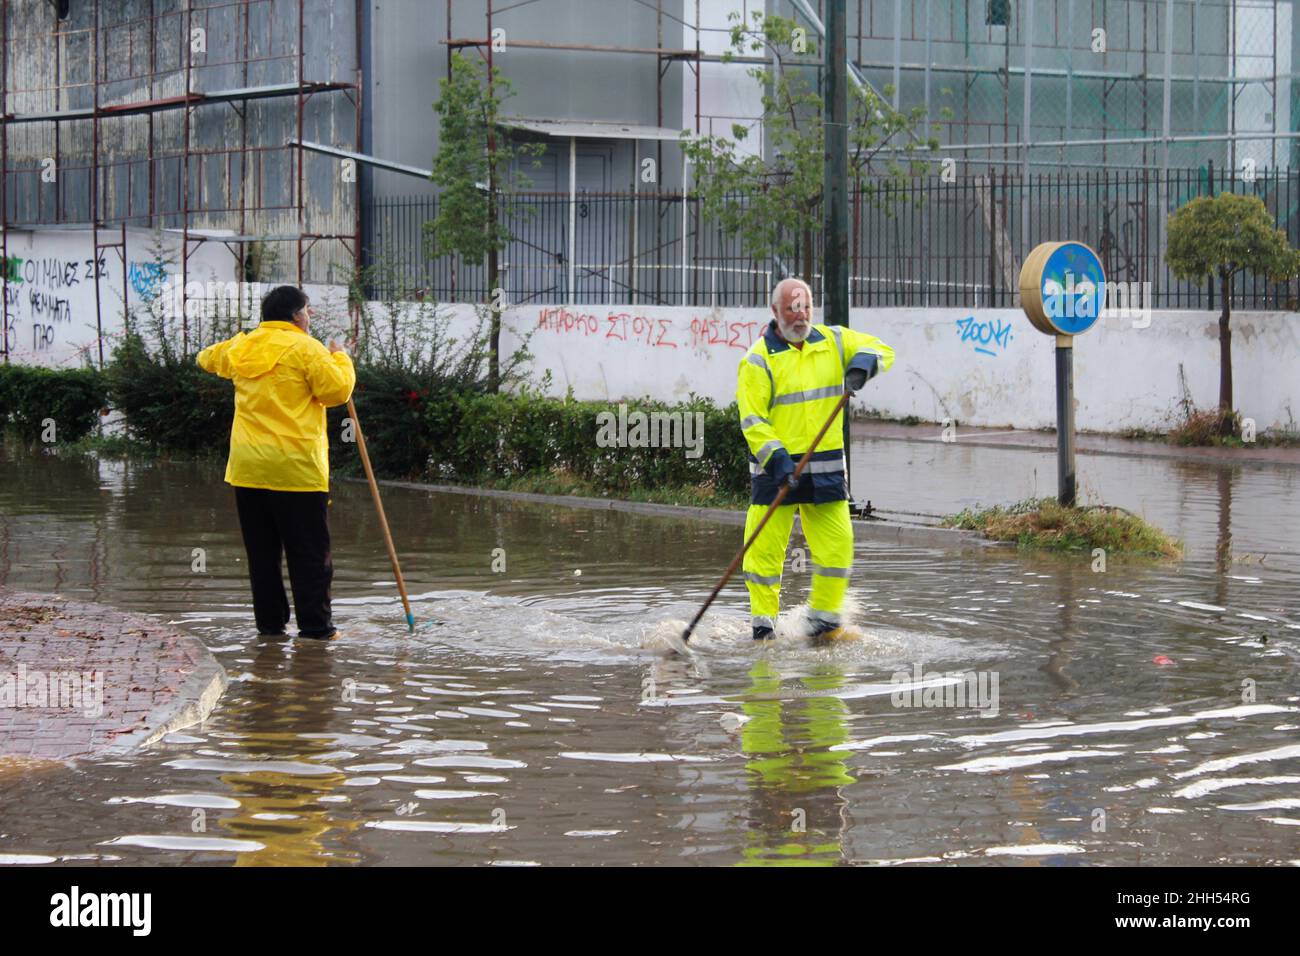 Cleaning up flooded street after heavy rainfall - Spata, Attica, Greece, October 31 2019 Stock Photo